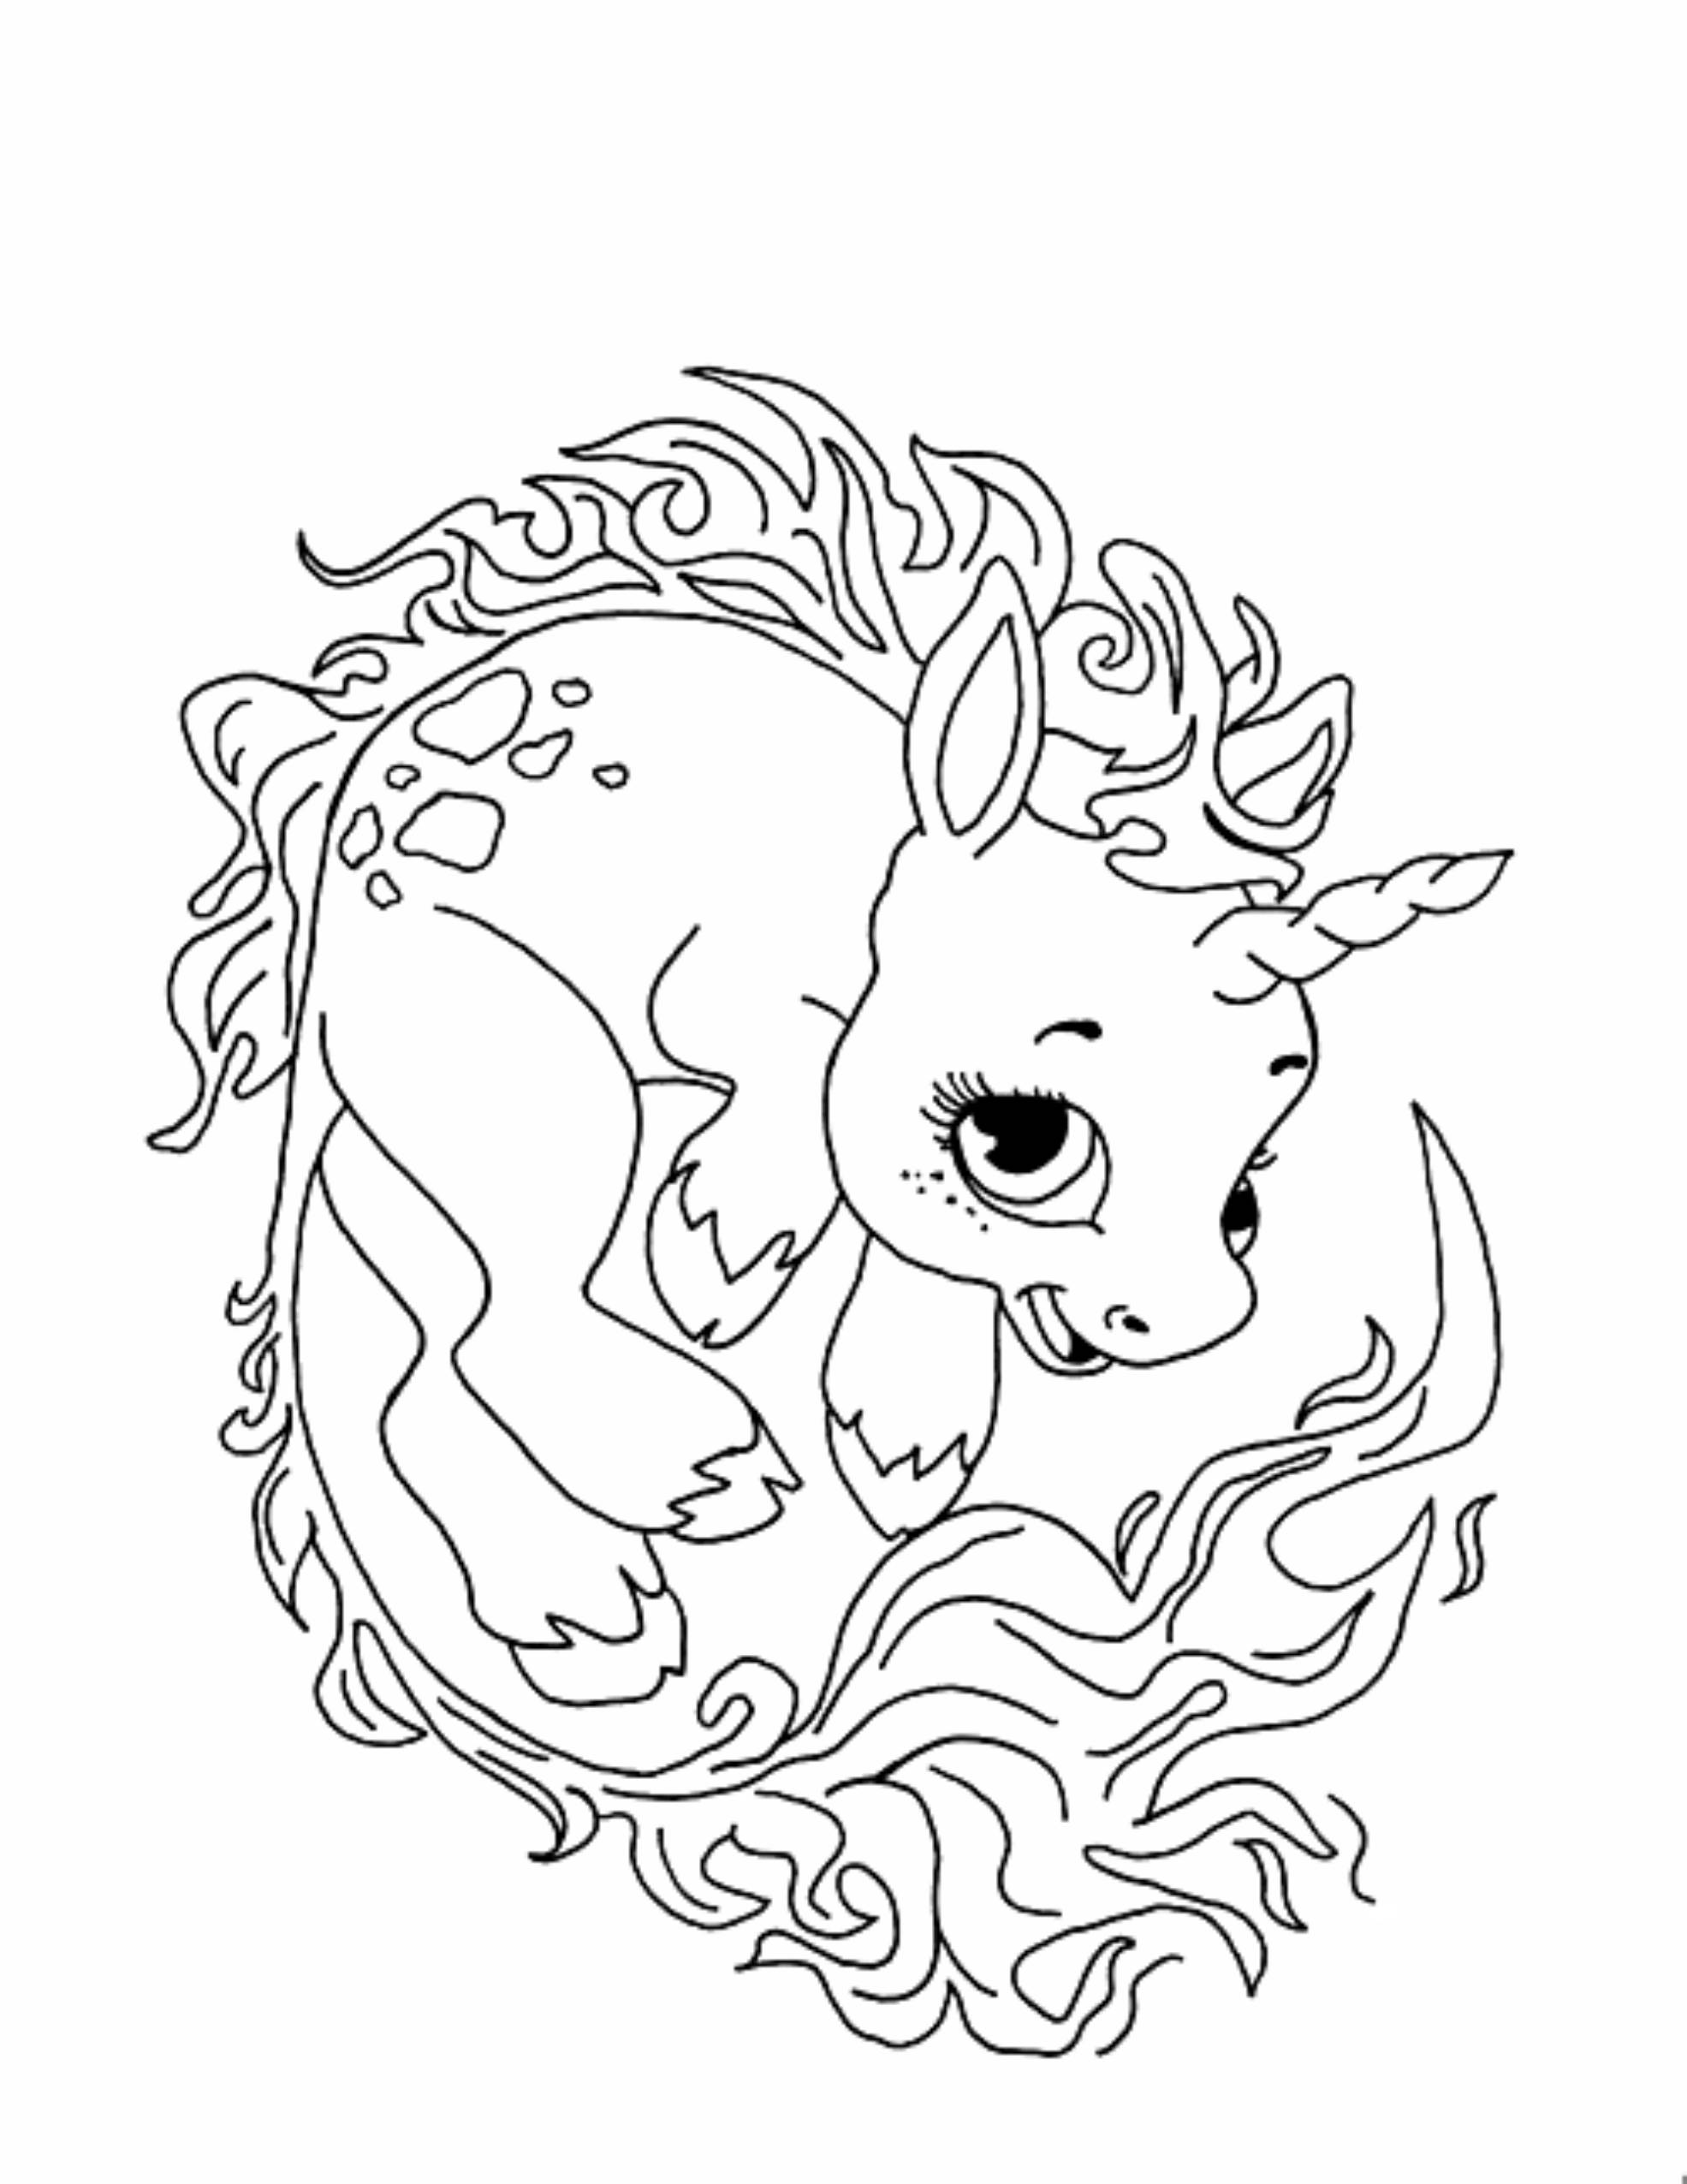 Free Printable Coloring Pages Unicorn Download Free Printable Coloring Pages Unicorn Png Images 